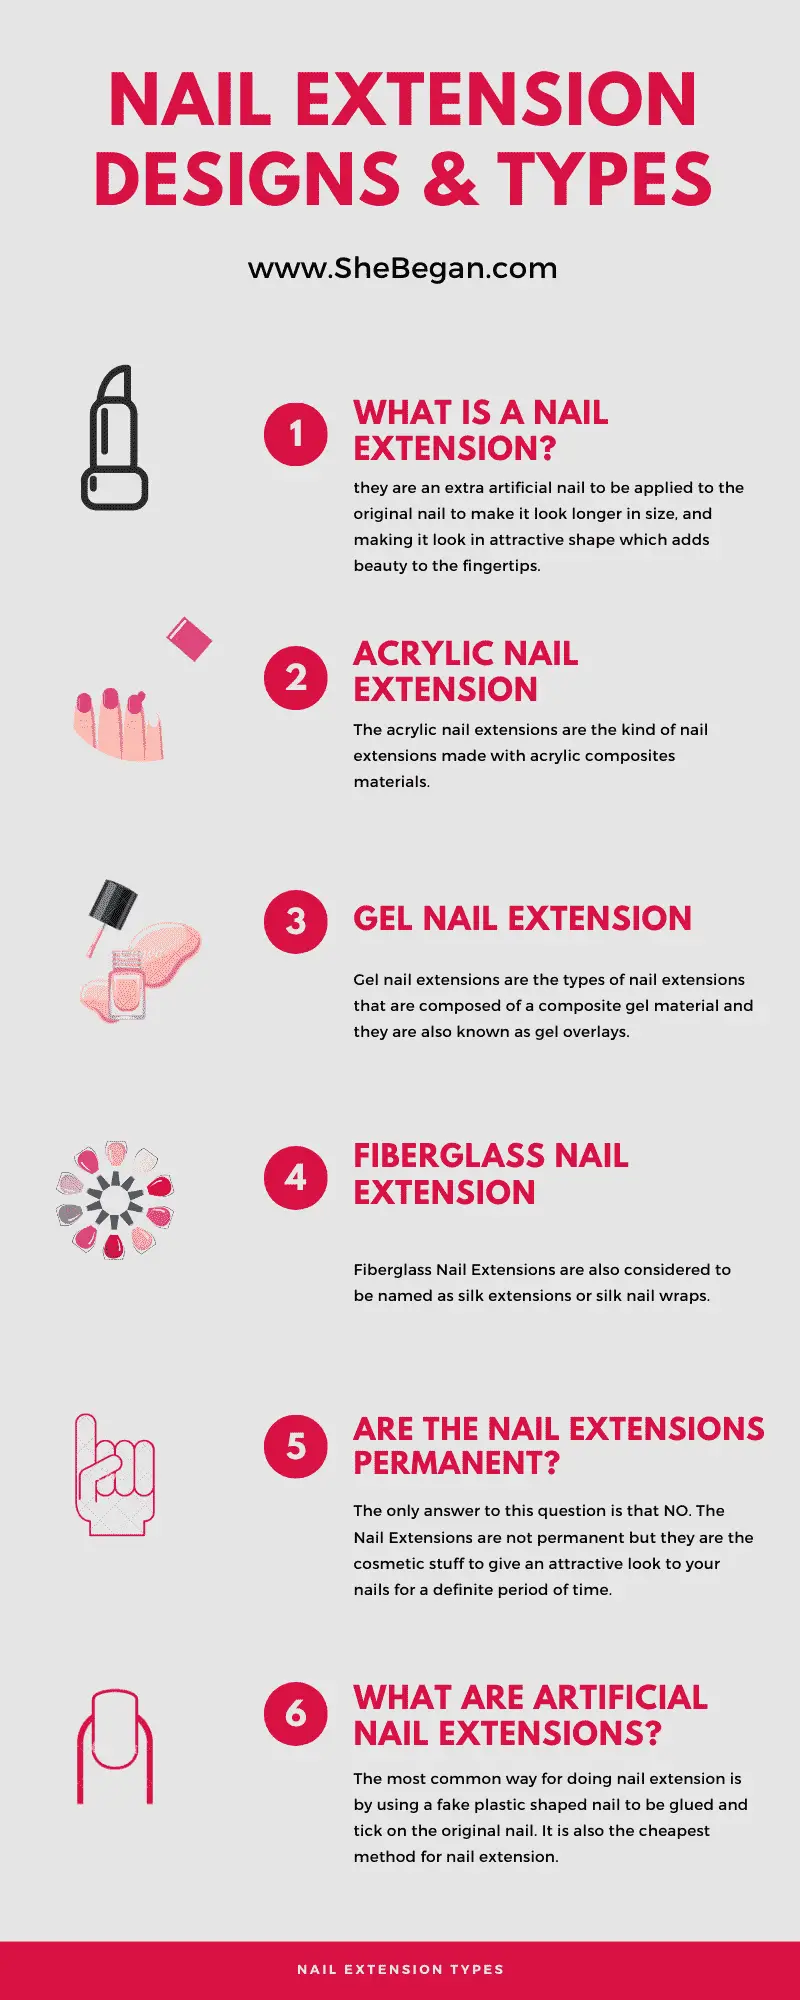 2021 Nail Extensions Designs Types Prices How To Apply Nail Extensions She Began